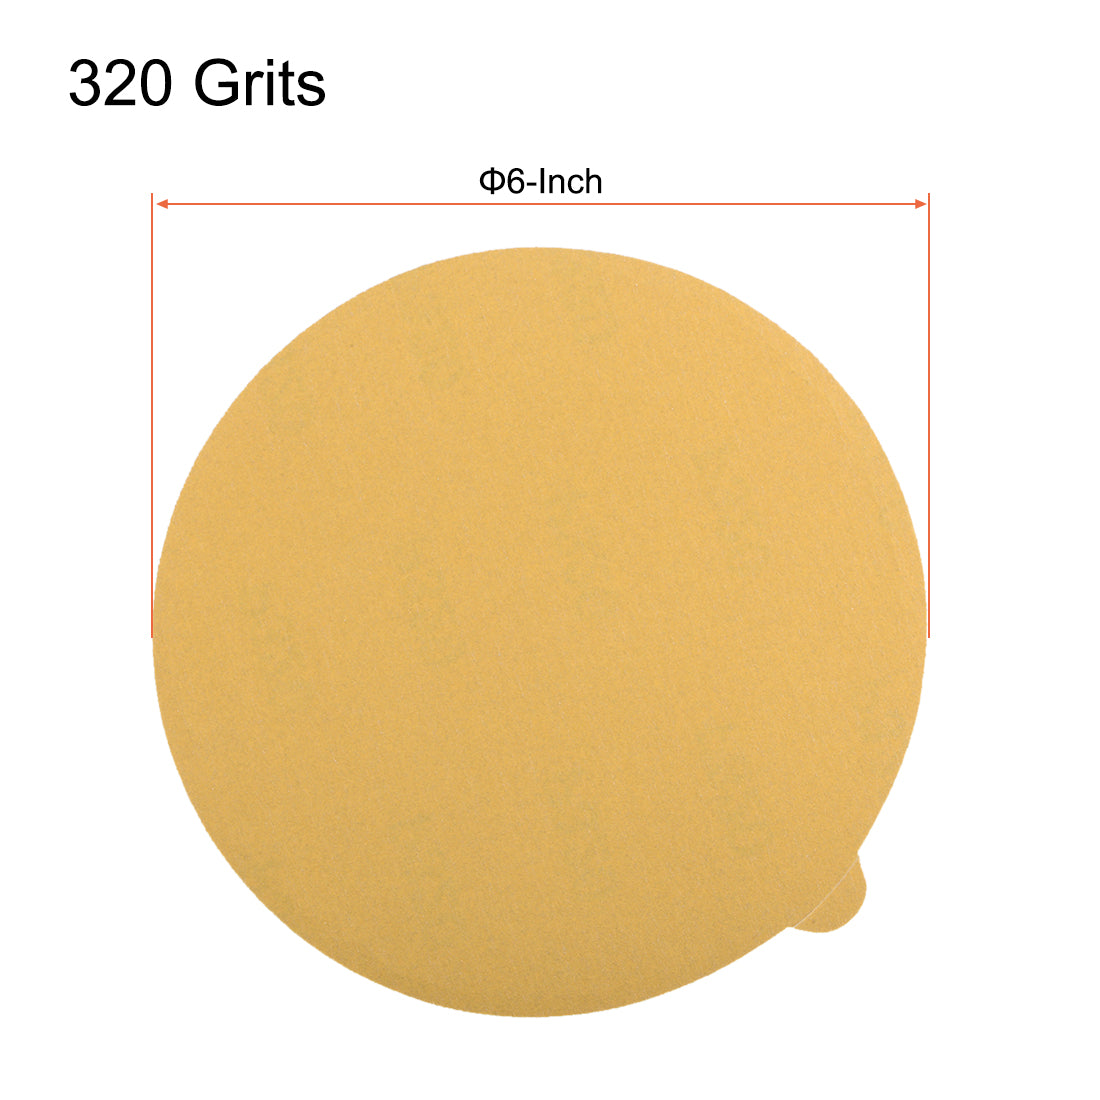 uxcell Uxcell 6-Inch PSA Sanding Disc Aluminum Oxide Adhesive Back Yellow 320 Grit 2 Pcs